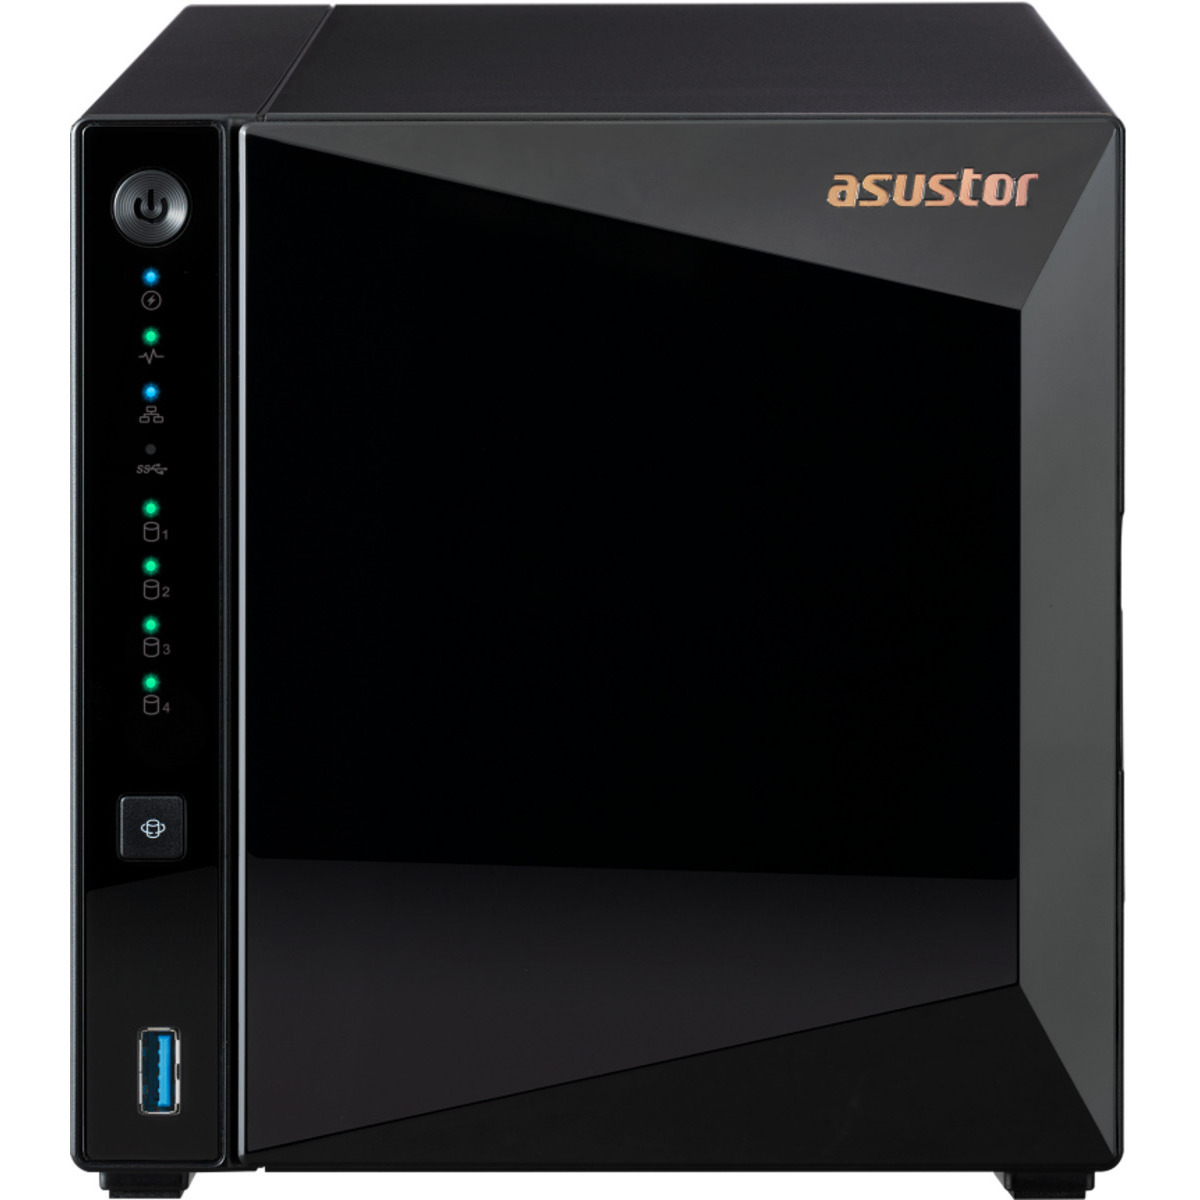 ASUSTOR DRIVESTOR 4 Pro Gen2 AS3304T v2 18tb 4-Bay Desktop Personal / Basic Home / Small Office NAS - Network Attached Storage Device 3x6tb Western Digital Red WD60EFAX 3.5 5400rpm SATA 6Gb/s HDD NAS Class Drives Installed - Burn-In Tested - ON SALE DRIVESTOR 4 Pro Gen2 AS3304T v2